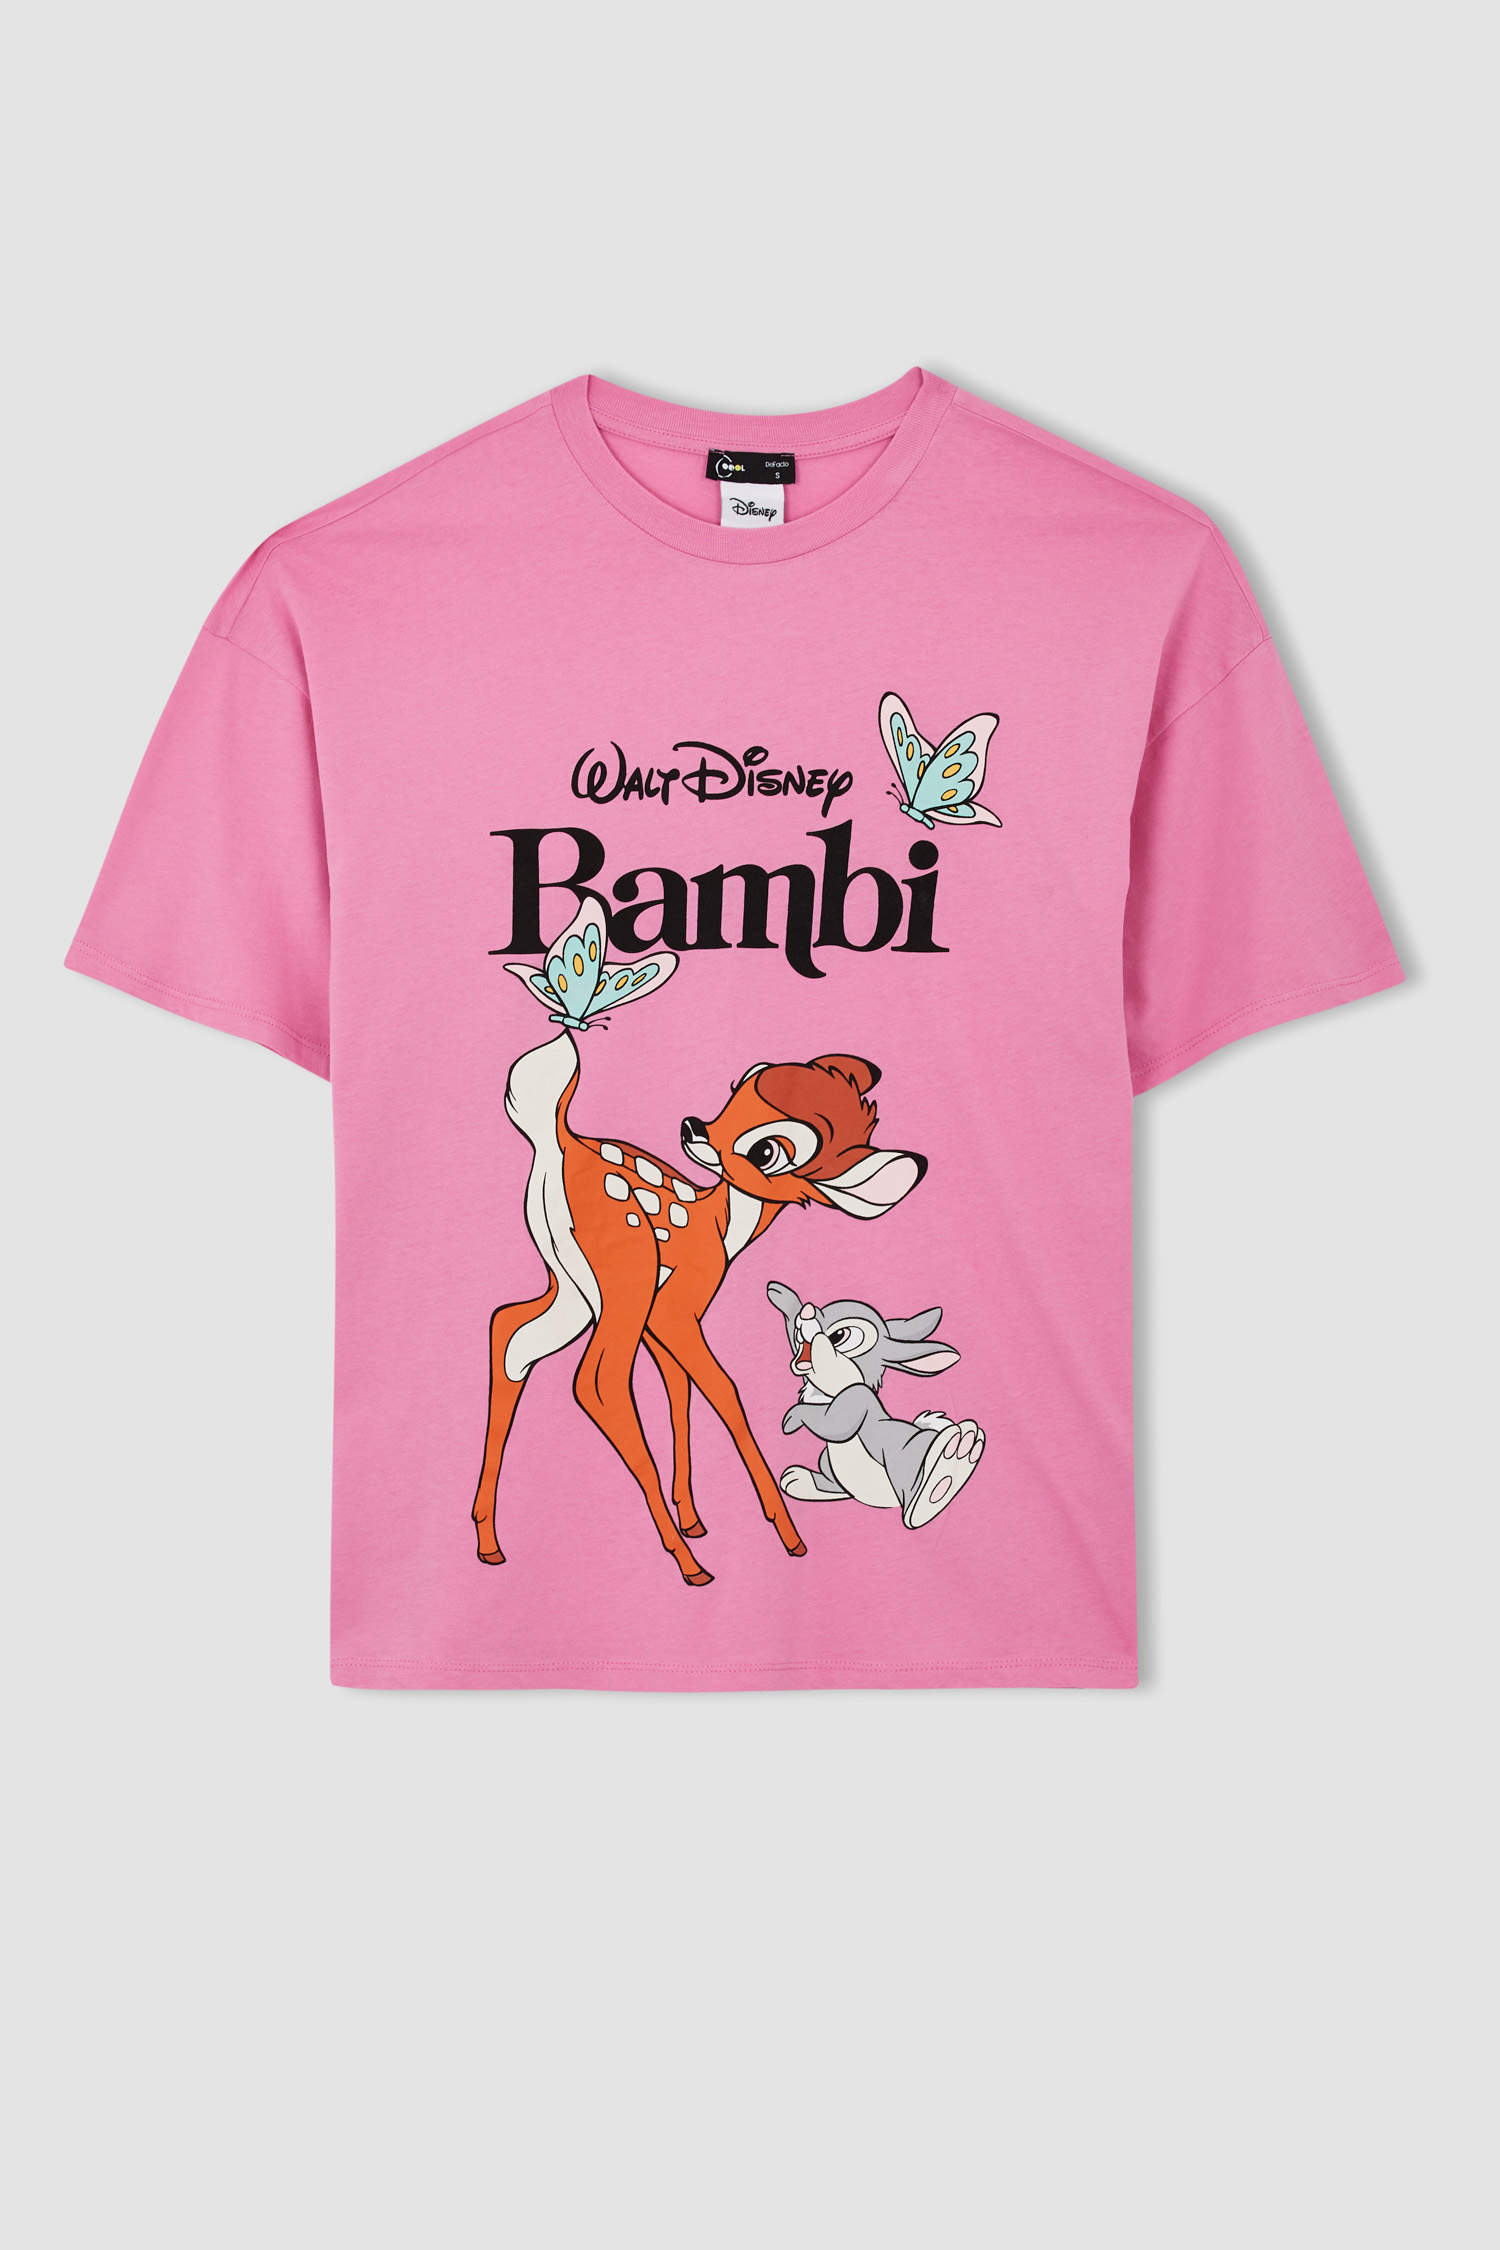 Pink WOMAN Licensed Short Sleeve 2560585 Bambi DeFacto T- Shirt Crew Printed | Oversize Neck Fit